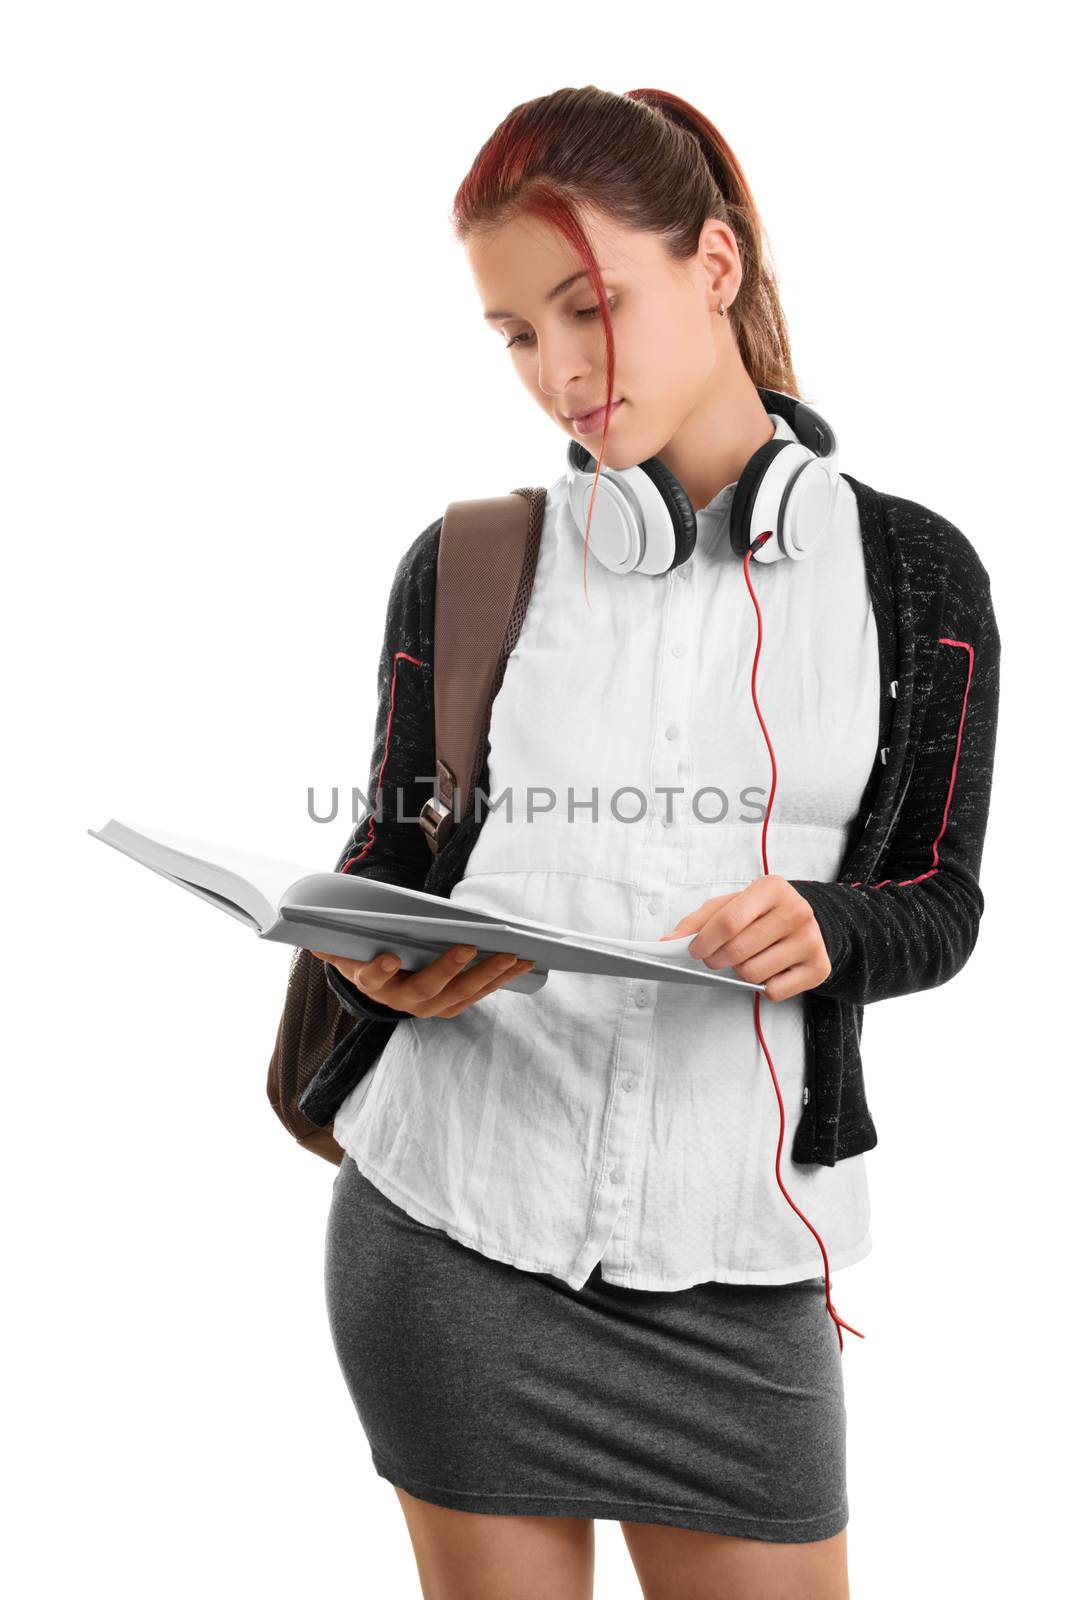 Young girl going through her notes by Mendelex